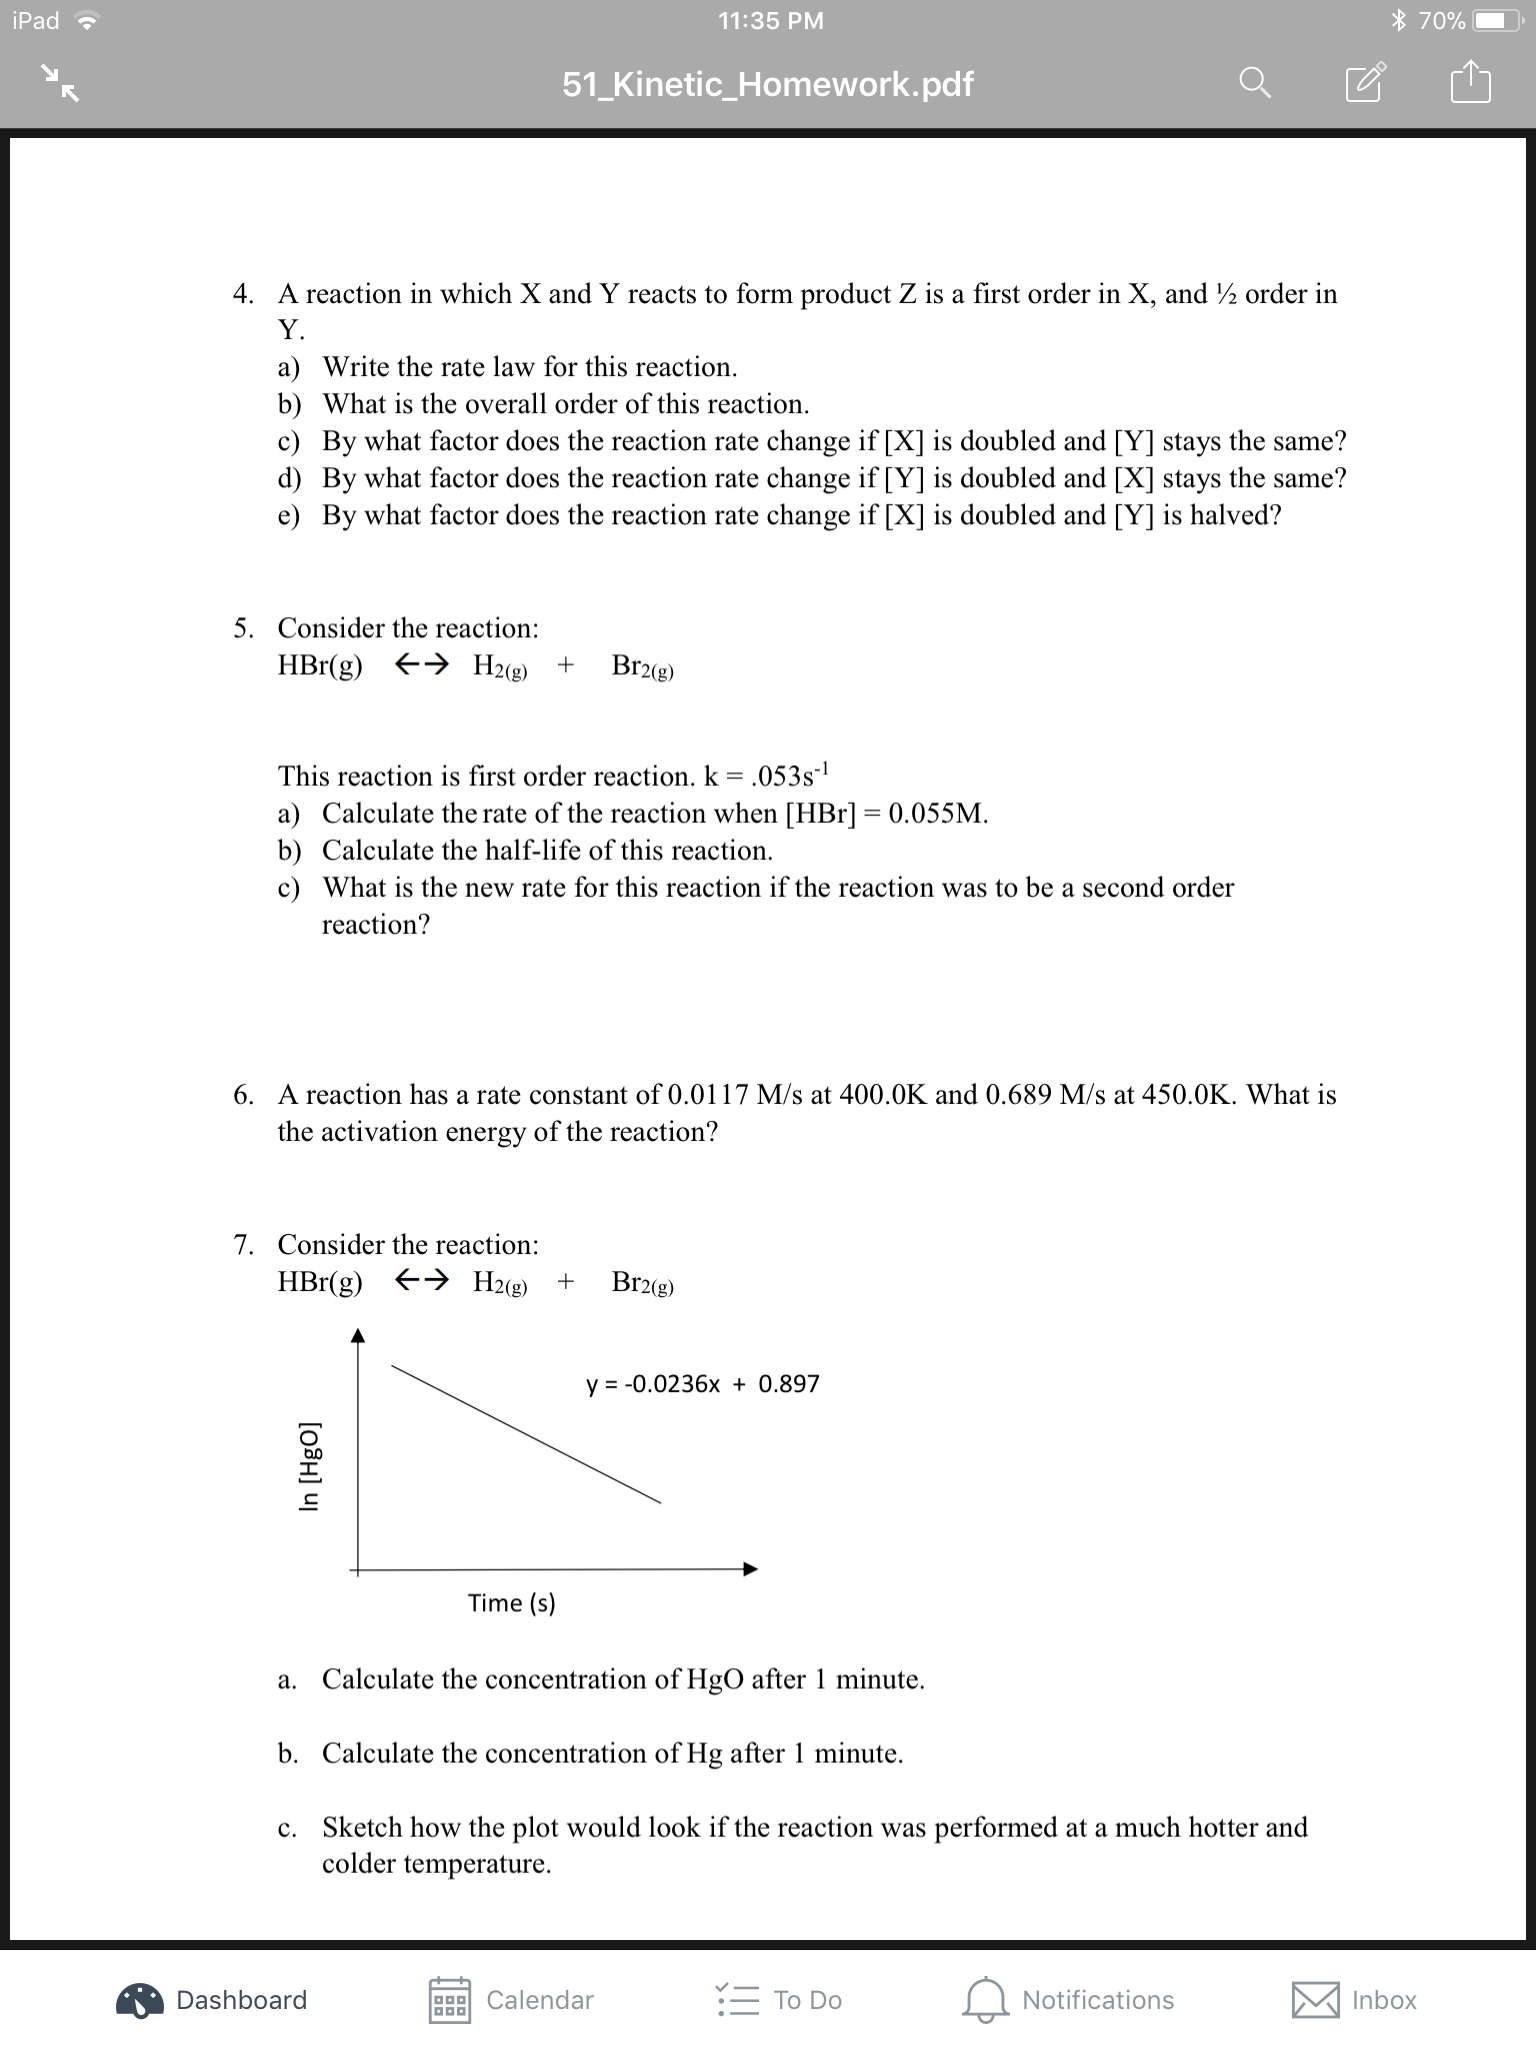 70%
iPad
11:35 PM
51_Kinetic_Homework.pdf
4. A reaction in which X and Y reacts to form product Z is a first order in X, and 2 order in
Y.
a) Write the rate law for this reaction
b) What is the overall order of this reaction.
c) By what factor does the reaction rate change if [X] is doubled and [Y] stays the same?
d) By what factor does the reaction rate change if [Y] is doubled and [X] stays the same?
e) By what factor does the reaction rate change if [X] is doubled and [Y] is halved?
5. Consider the reaction:
H2(g)
Br2(g)
HBr(g)
This reaction is first order reaction. k = .053s1
a) Calculate the rate of the reaction when [HBr] = 0.055M
b) Calculate the half-life of this reaction
c) What is the new rate for this reaction if the reaction was to be a second order
reaction?
6. A reaction has a rate constant of 0.0117 M/s at 400.0K and 0.689 M/s at 450.0K. What is
the activation energy of the reaction?
7. Consider the reaction:
HBr(g) H2(g)
Br2(g)
y = -0.0236x + 0.897
Time (s)
a. Calculate the concentration of HgO after 1 minute
b. Calculate the concentration of Hg after 1 minute.
c. Sketch how the plot would look if the reaction was performed at a much hotter and
colder temperature
To Do
Notifications
Inbox
Dashboard
Calendar
In [HgO]
